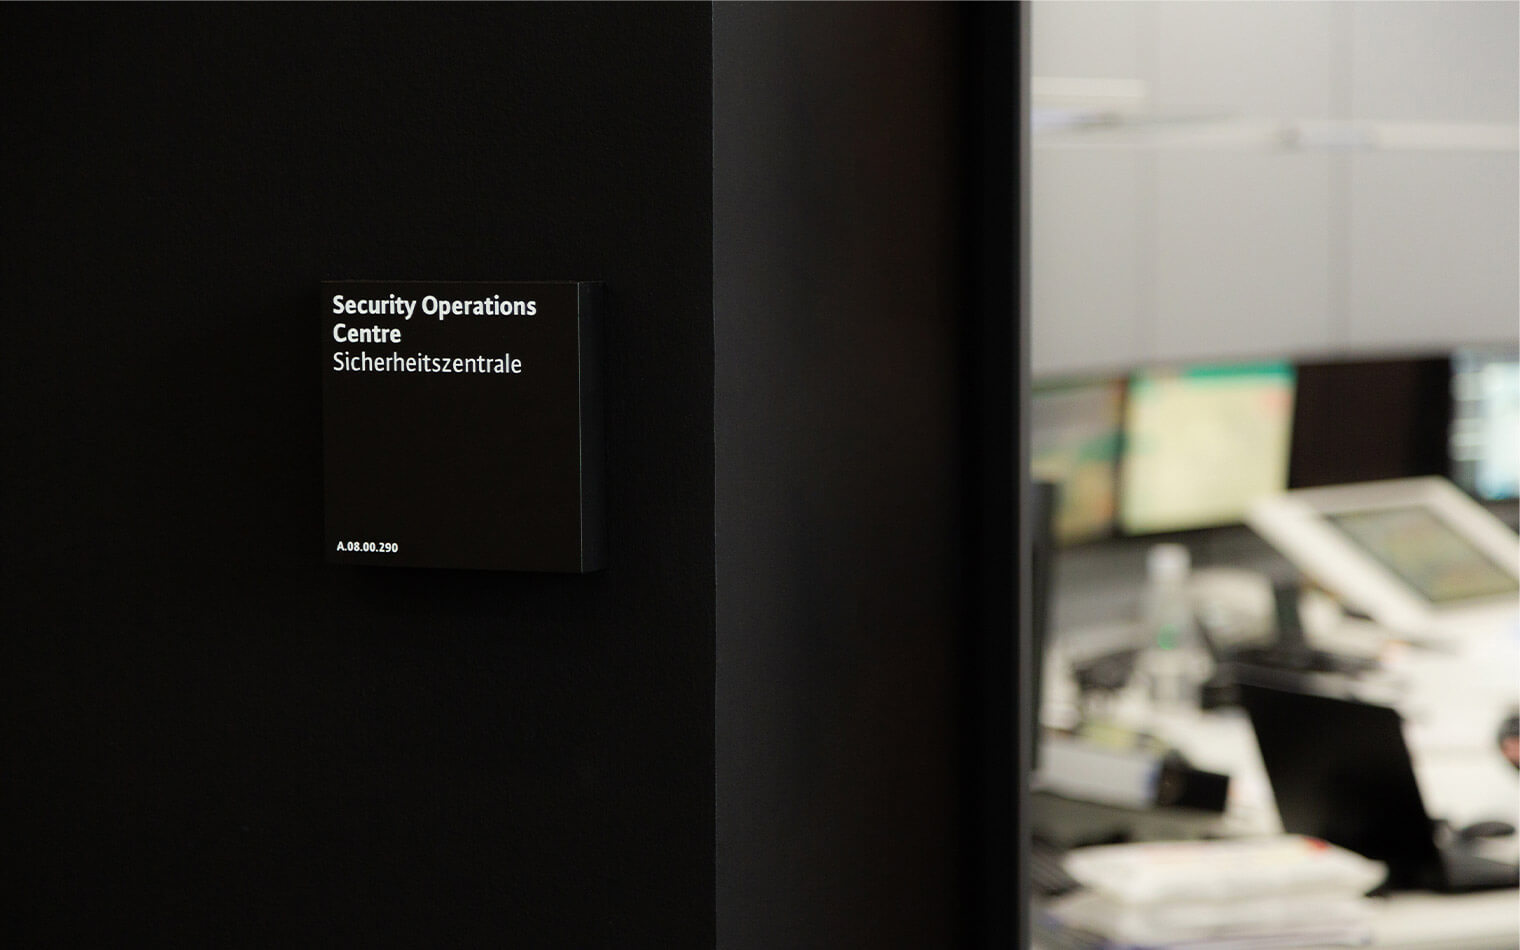 In this photo, the security center door sign can be seen on a black background.